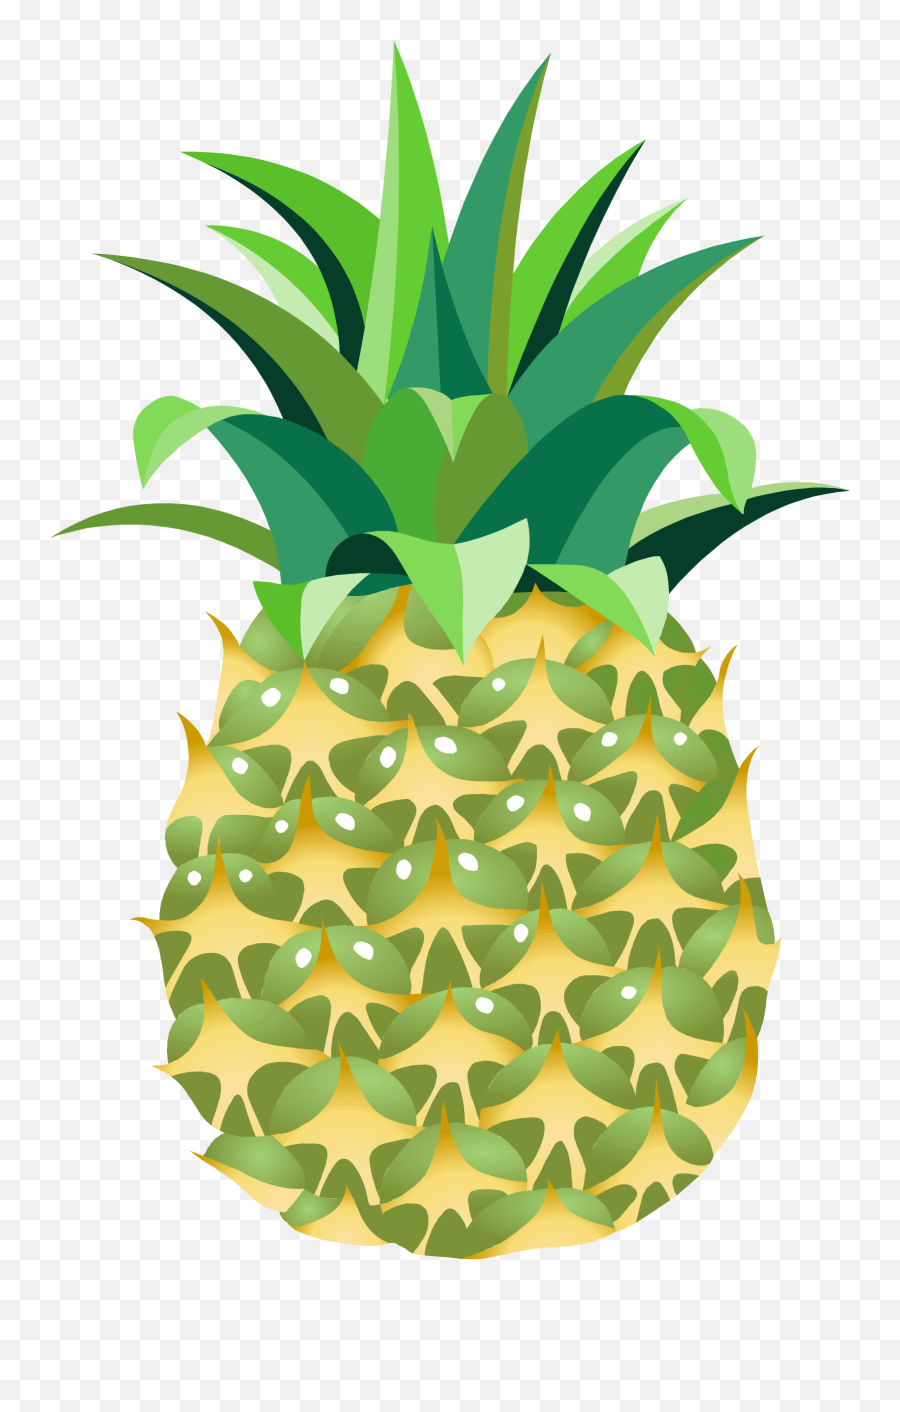 Pineapple Transparent Images - Pineapple Png Logo Emoji,Pineapple Transparent